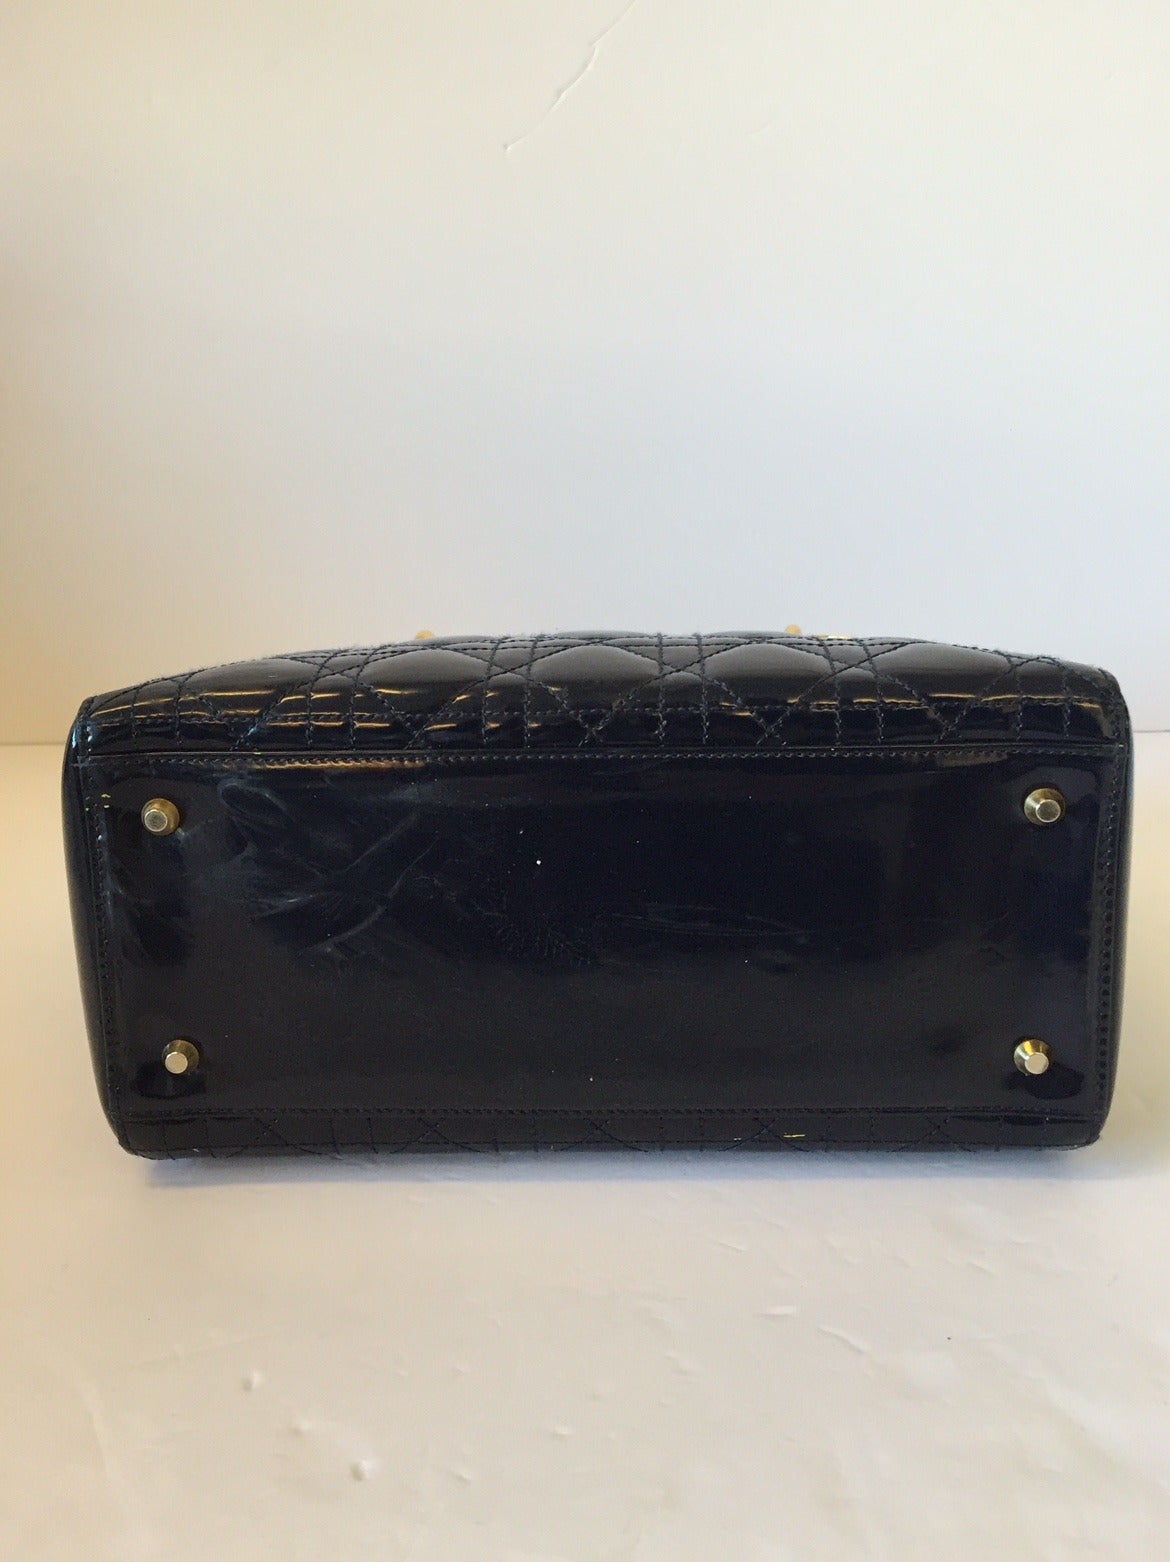 Lady Dior Medium Patent Leather Midnight Bag Retail $3600 In Good Condition For Sale In Westmount, Quebec